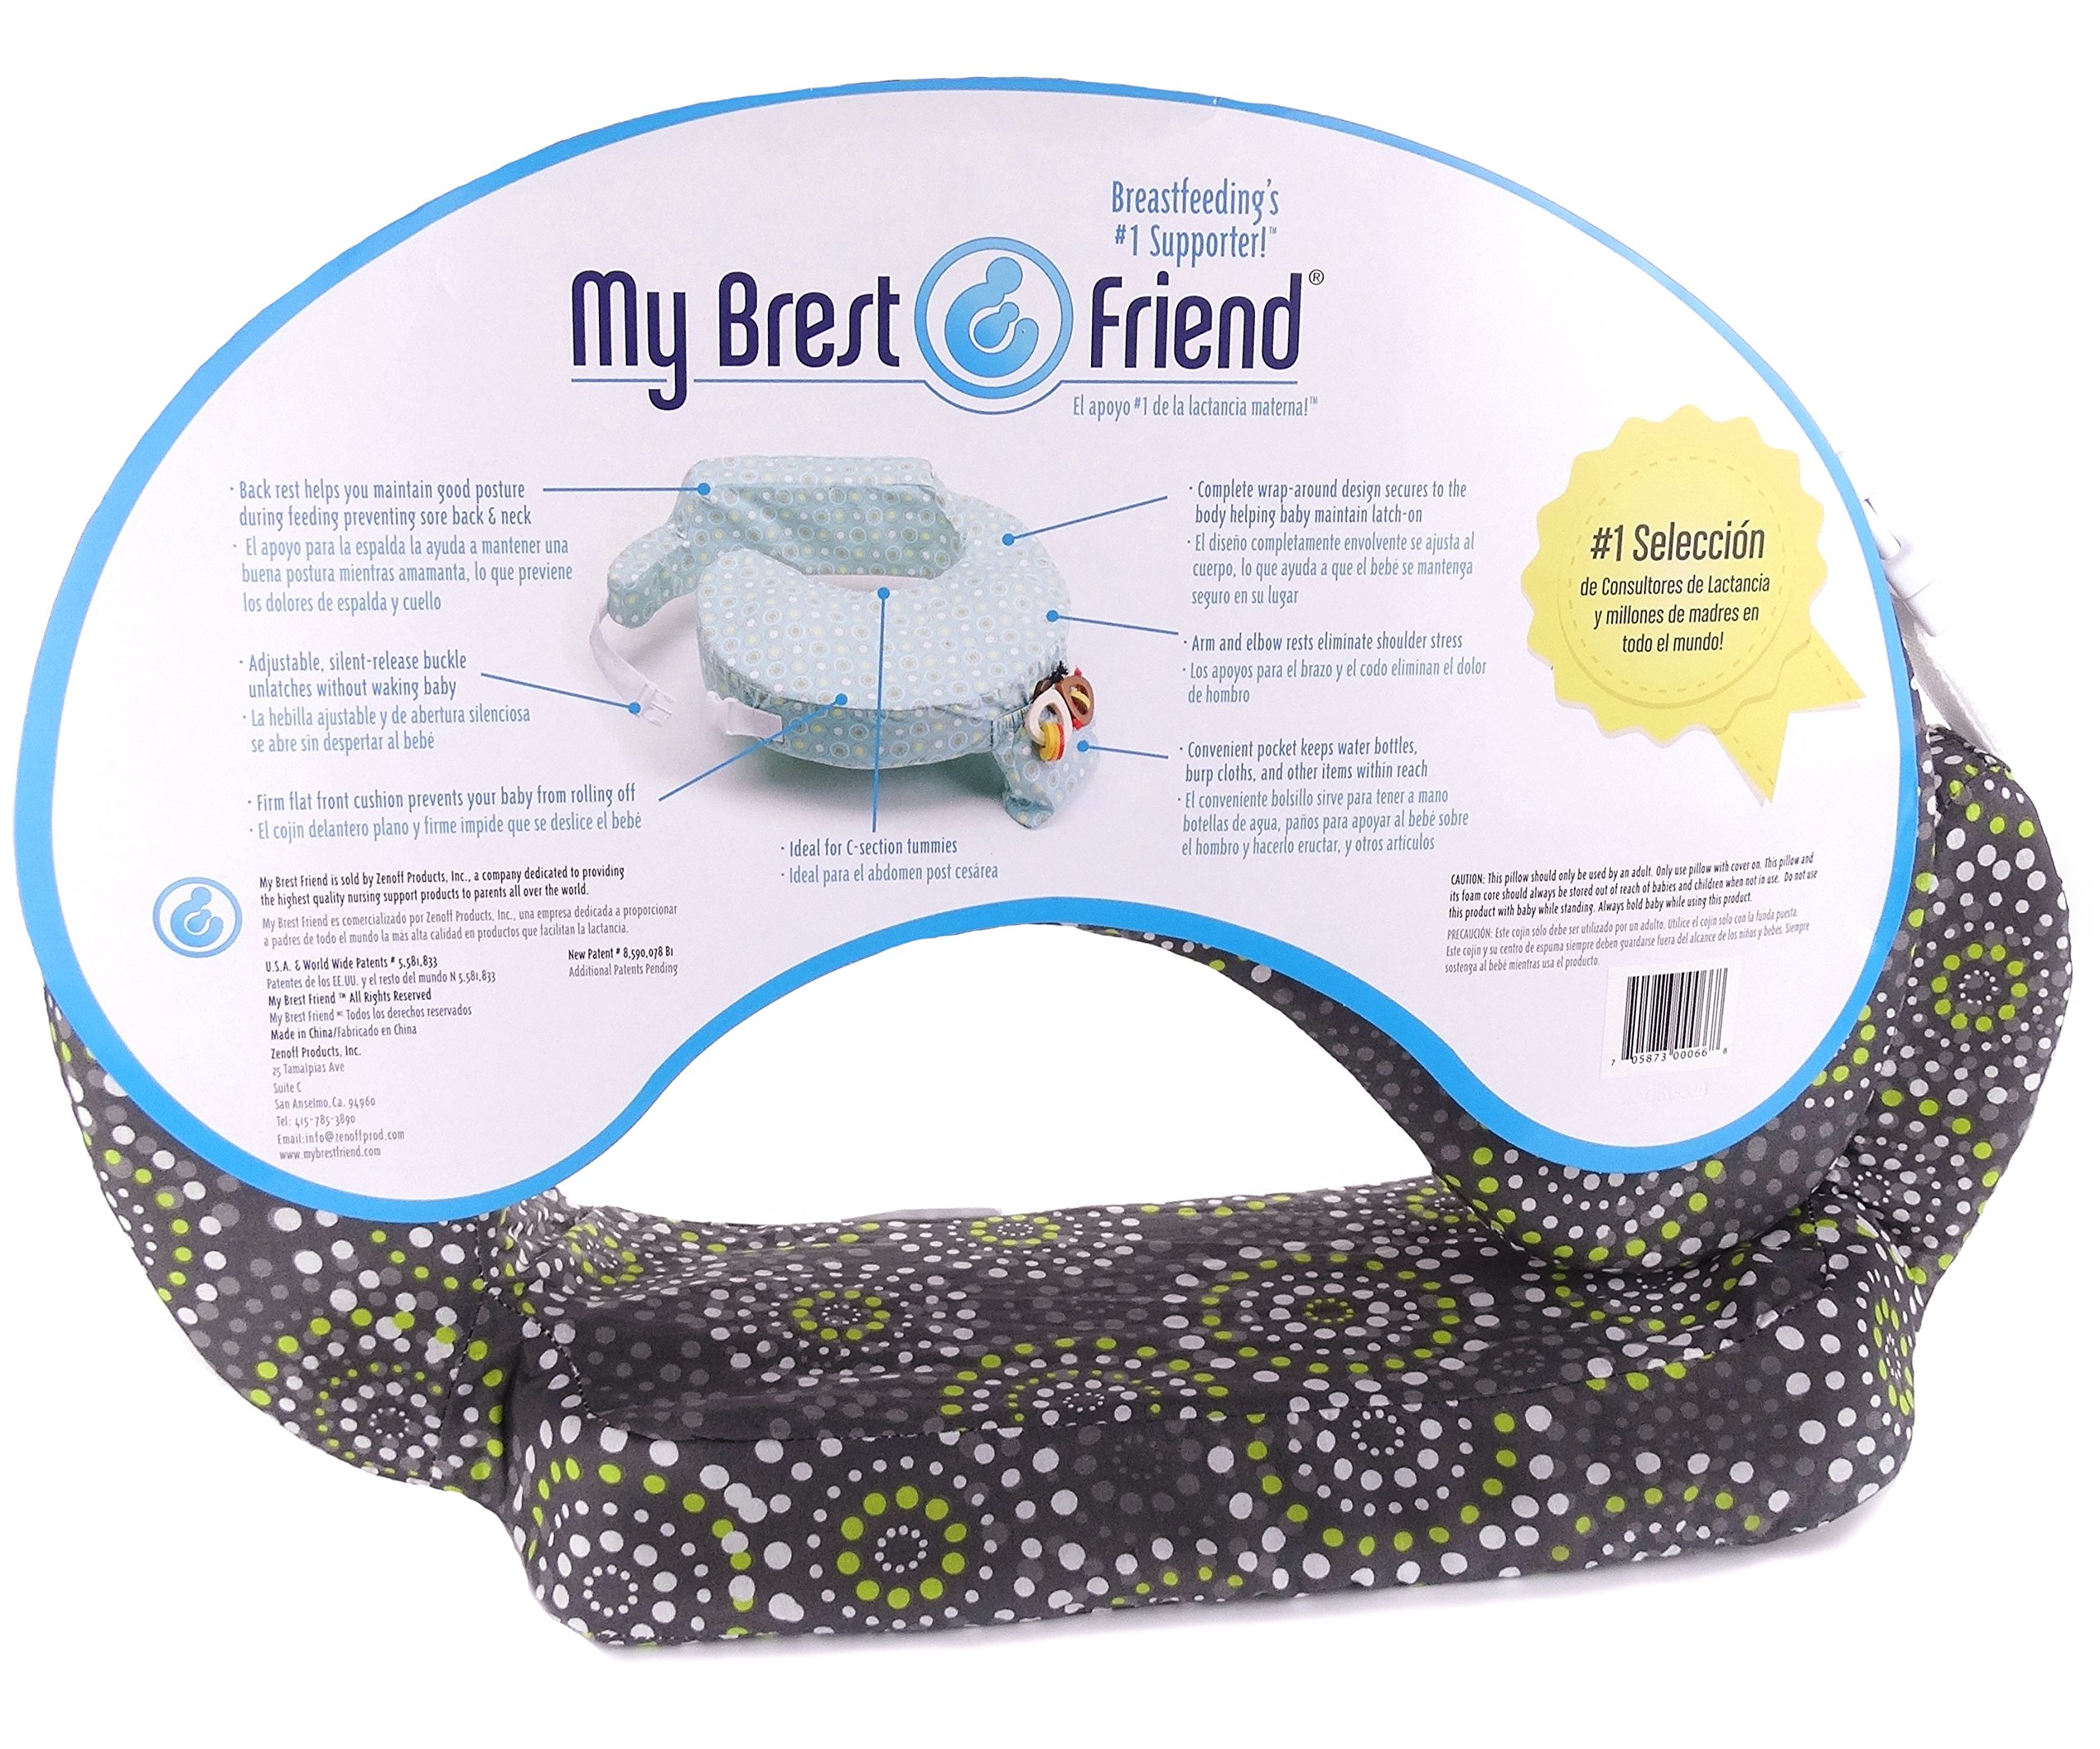 My Brest Friend Original Nursing Pillow for Breastfeeding, Nursing and Posture Support with Pocket and Removable Slipcover, Grey, Yellow Fireworks